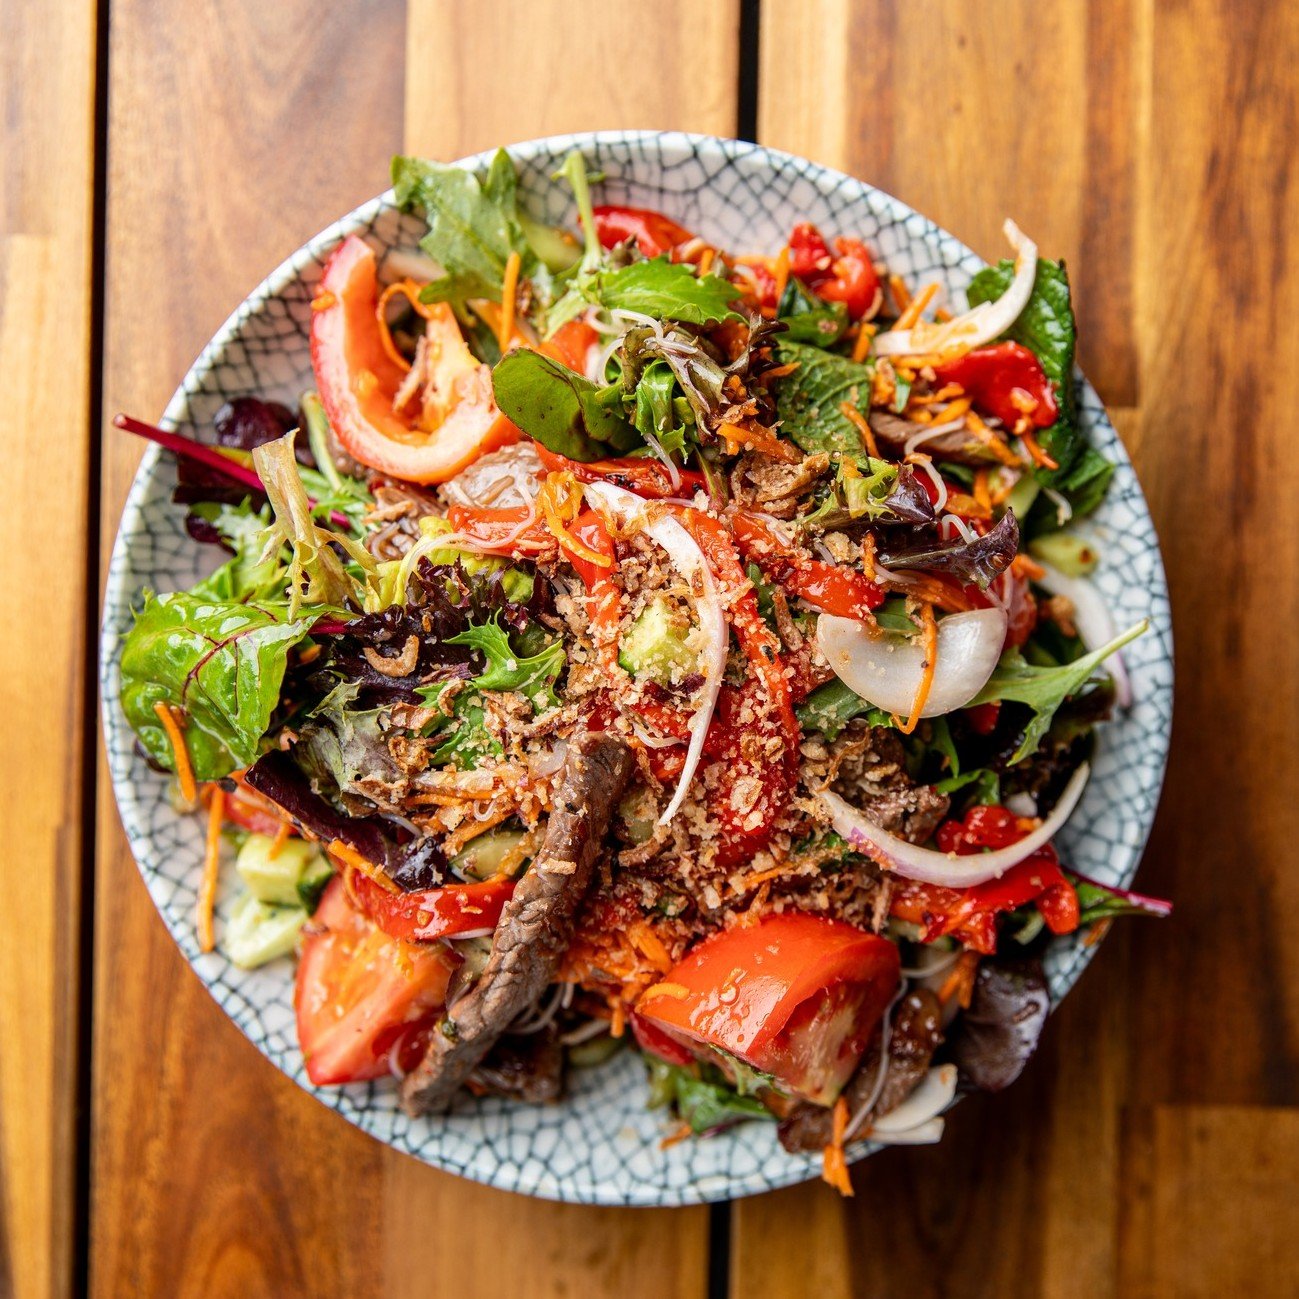 Start the week on a fresh note with our warm Thai beef salad.

Charred beef tossed through an asian mix of Thai basil, mint, coriander, lettuce, vermicelli and fresh veggies dressed in Thai dressing finished with toasted peanuts.

#HarwoodHotel #Visi